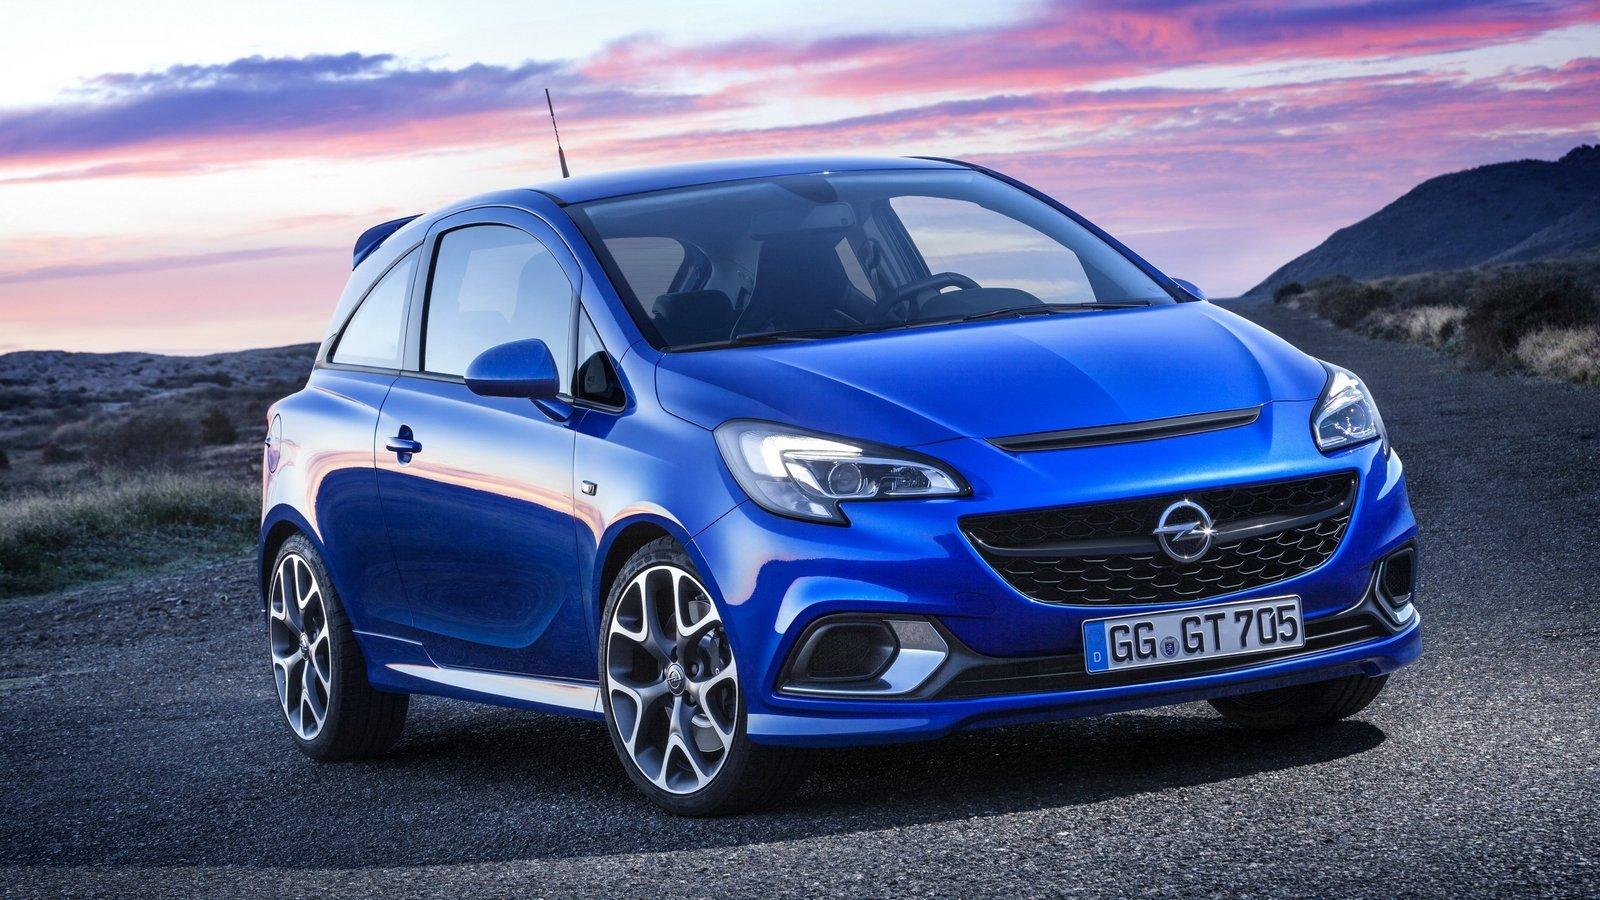 Wallpaper Opel, Corsa, 2019-20, GS Line for mobile and desktop, section opel,  resolution 4050x2700 - download